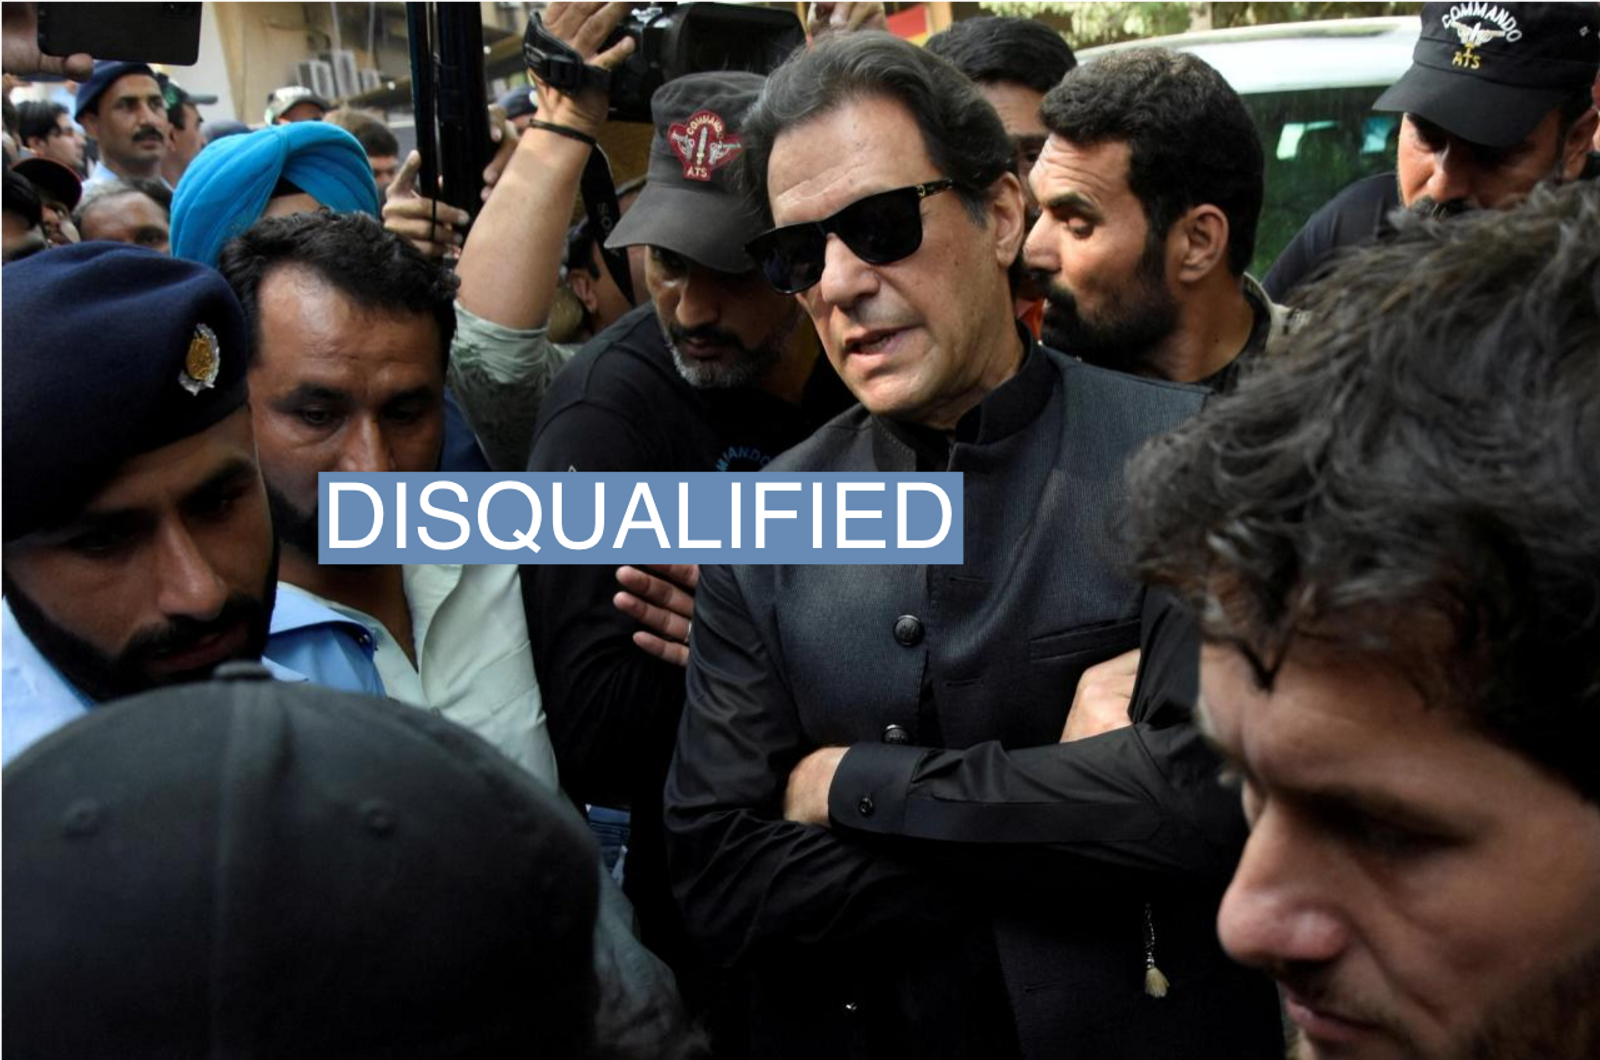 Pakistan's former Prime Minister Imran Khan, who is facing a contempt of court case, appears at a court, in Islamabad, Pakistan September 22, 2022